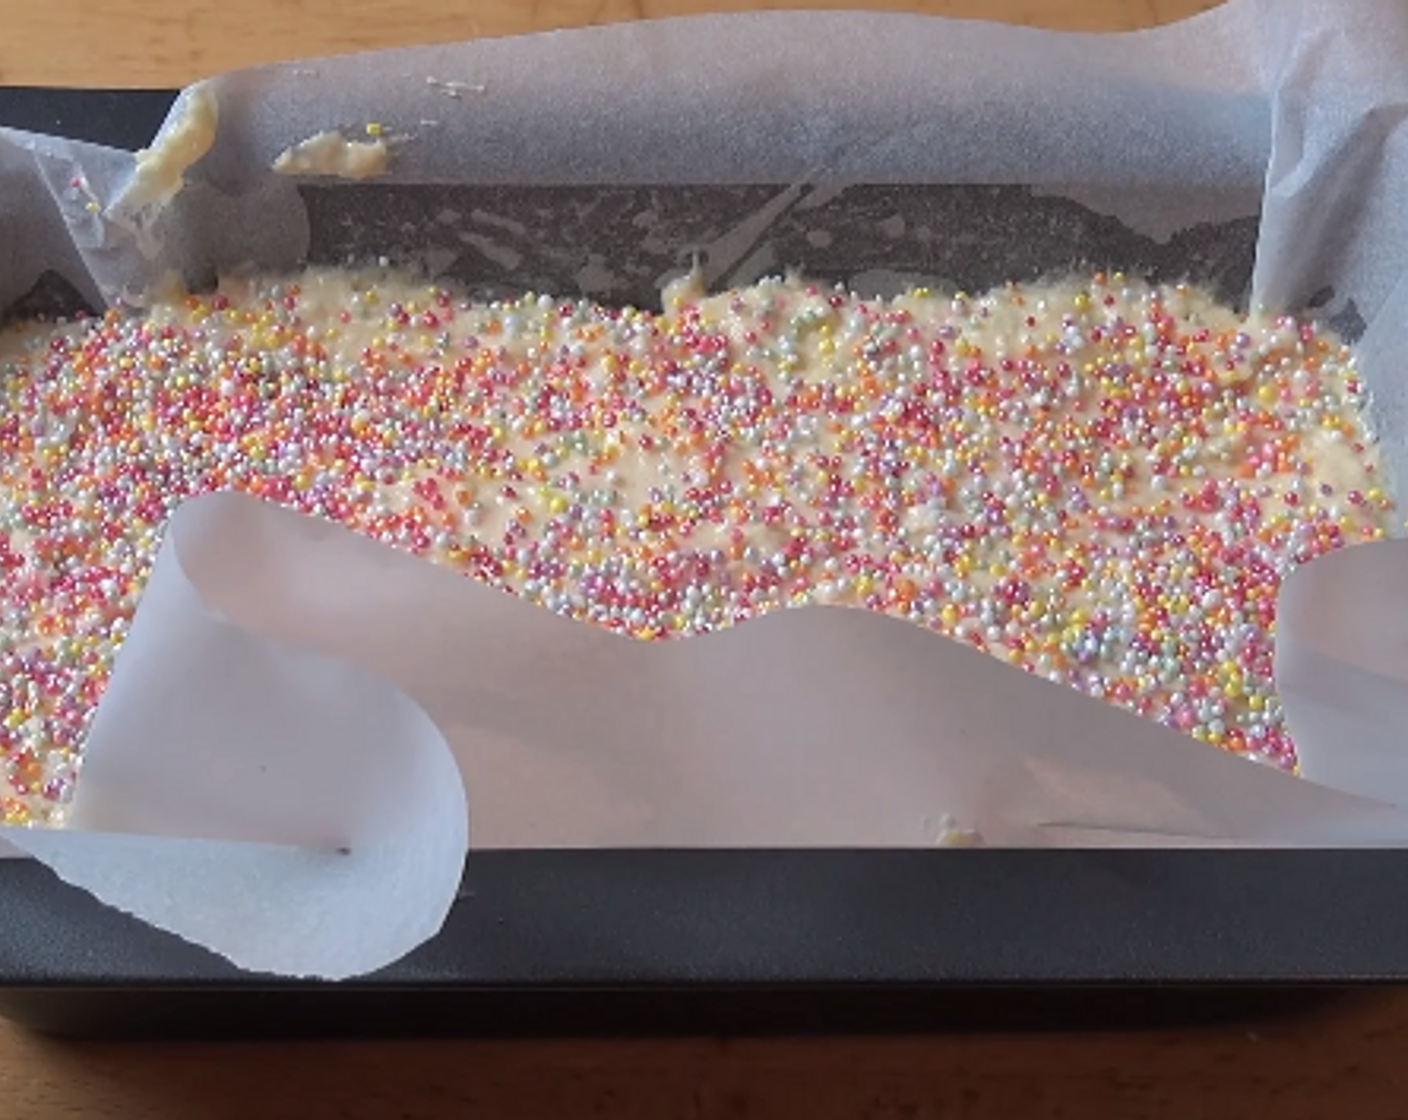 step 3 Grease a loaf pan and line with non-stick baking paper. Pour in cake mixture and level with a spoon. Finish with a layer of Sprinkles (1/4 cup) on top. Cook at 180 degrees C (350 degrees F) for 45 minutes or until a skewer in the center comes out clean.